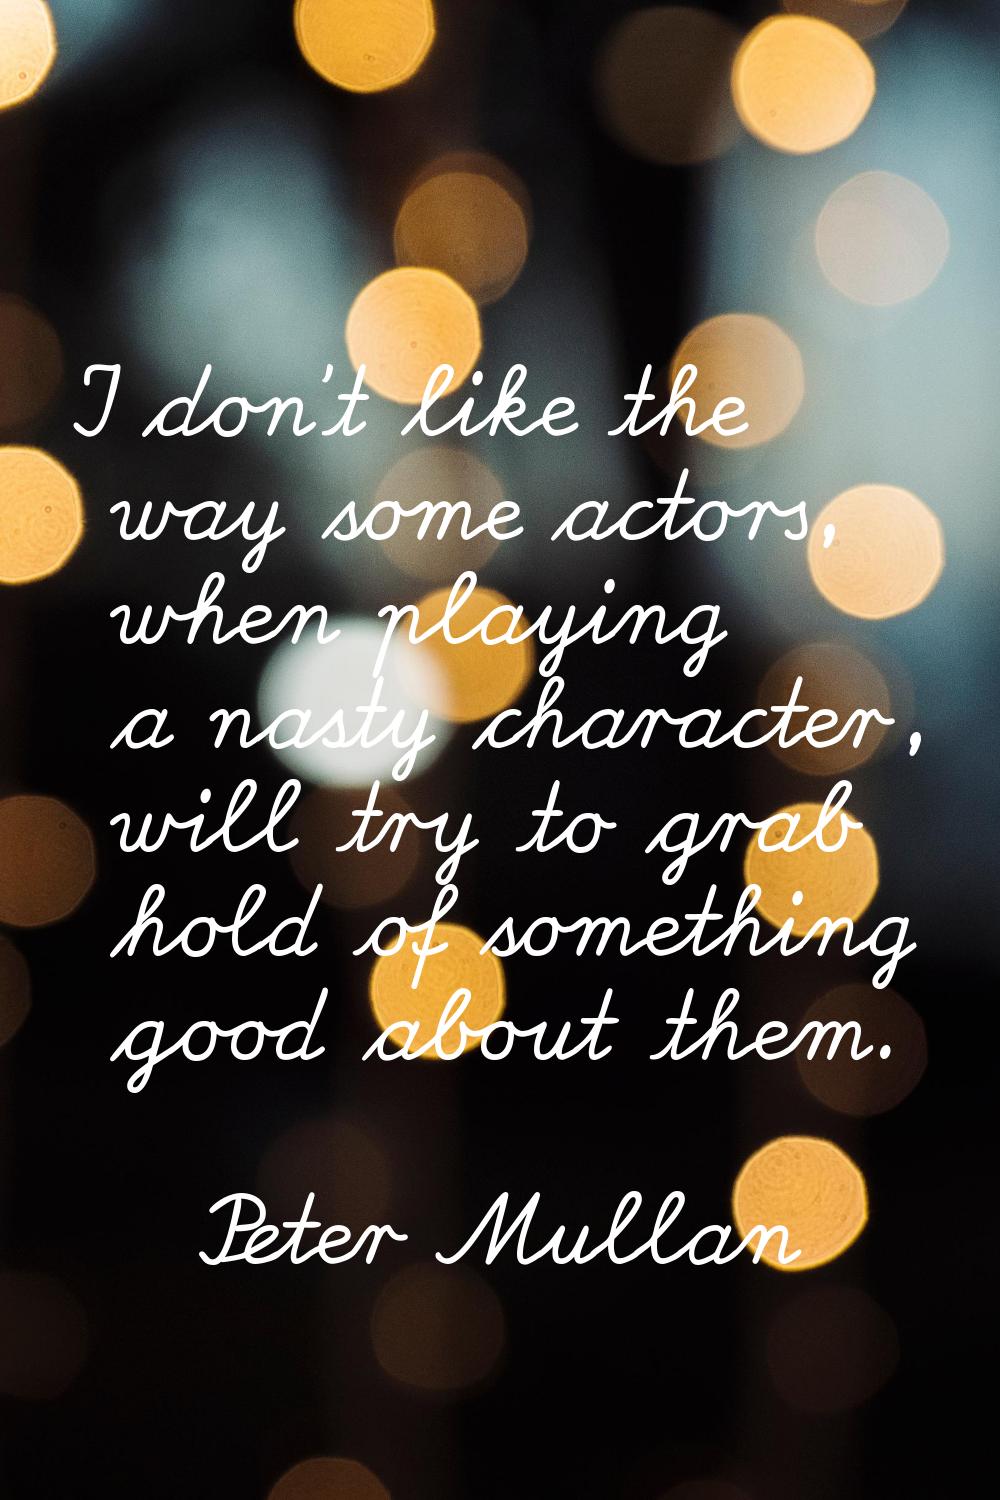 I don't like the way some actors, when playing a nasty character, will try to grab hold of somethin